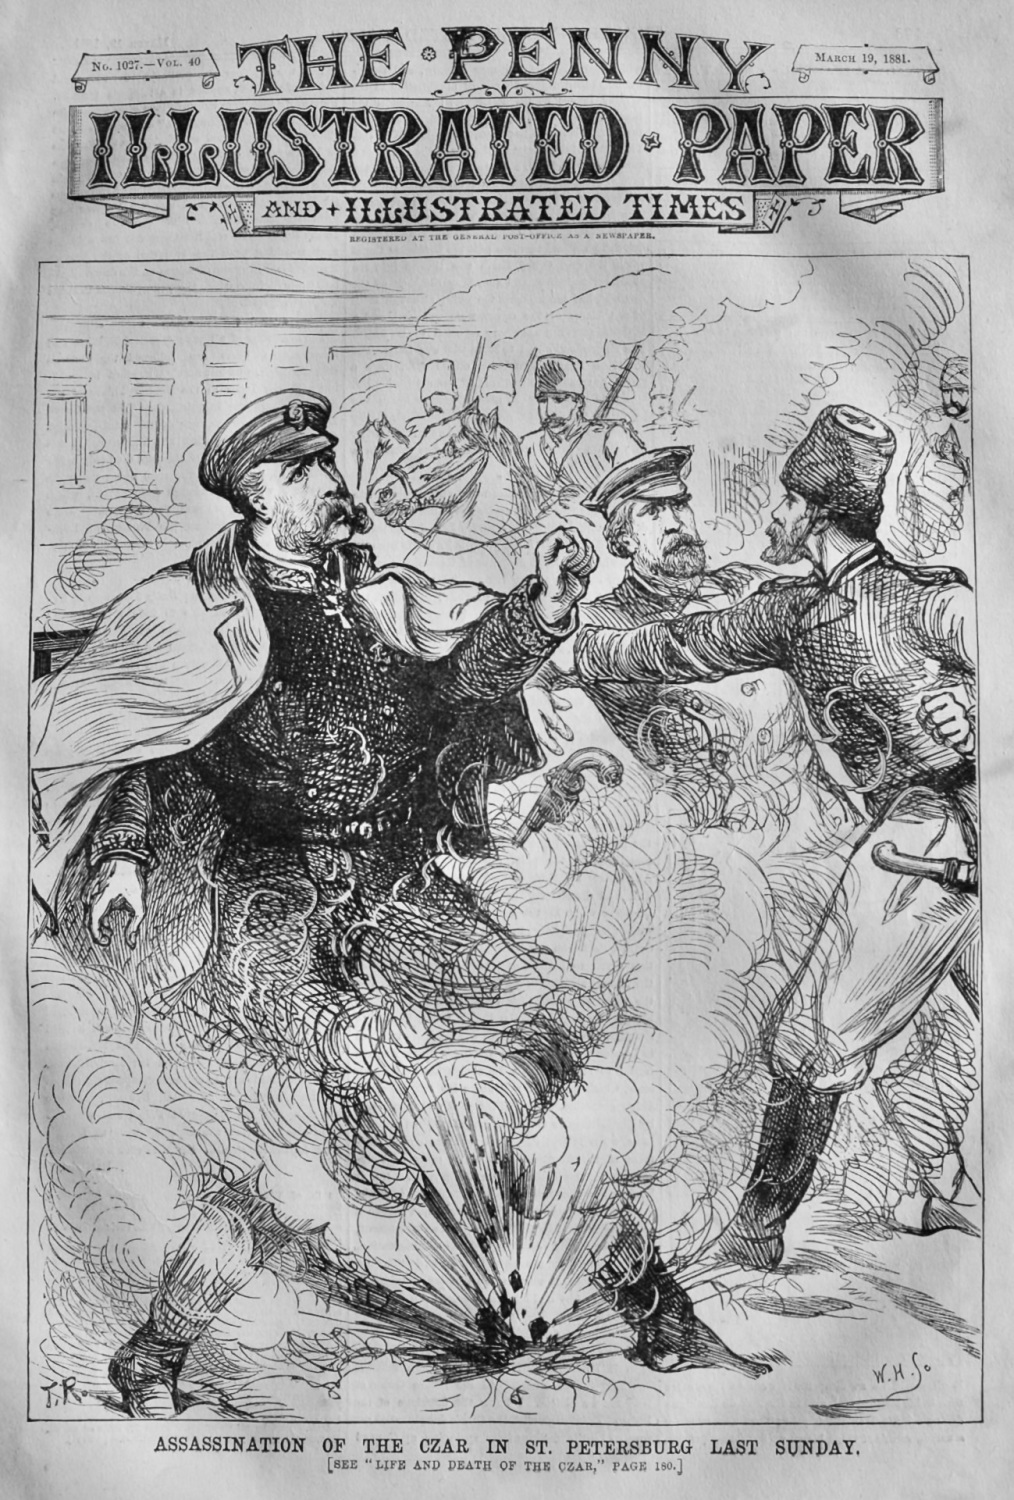 Assassination of the Czar in St. Petersburg .  1881.